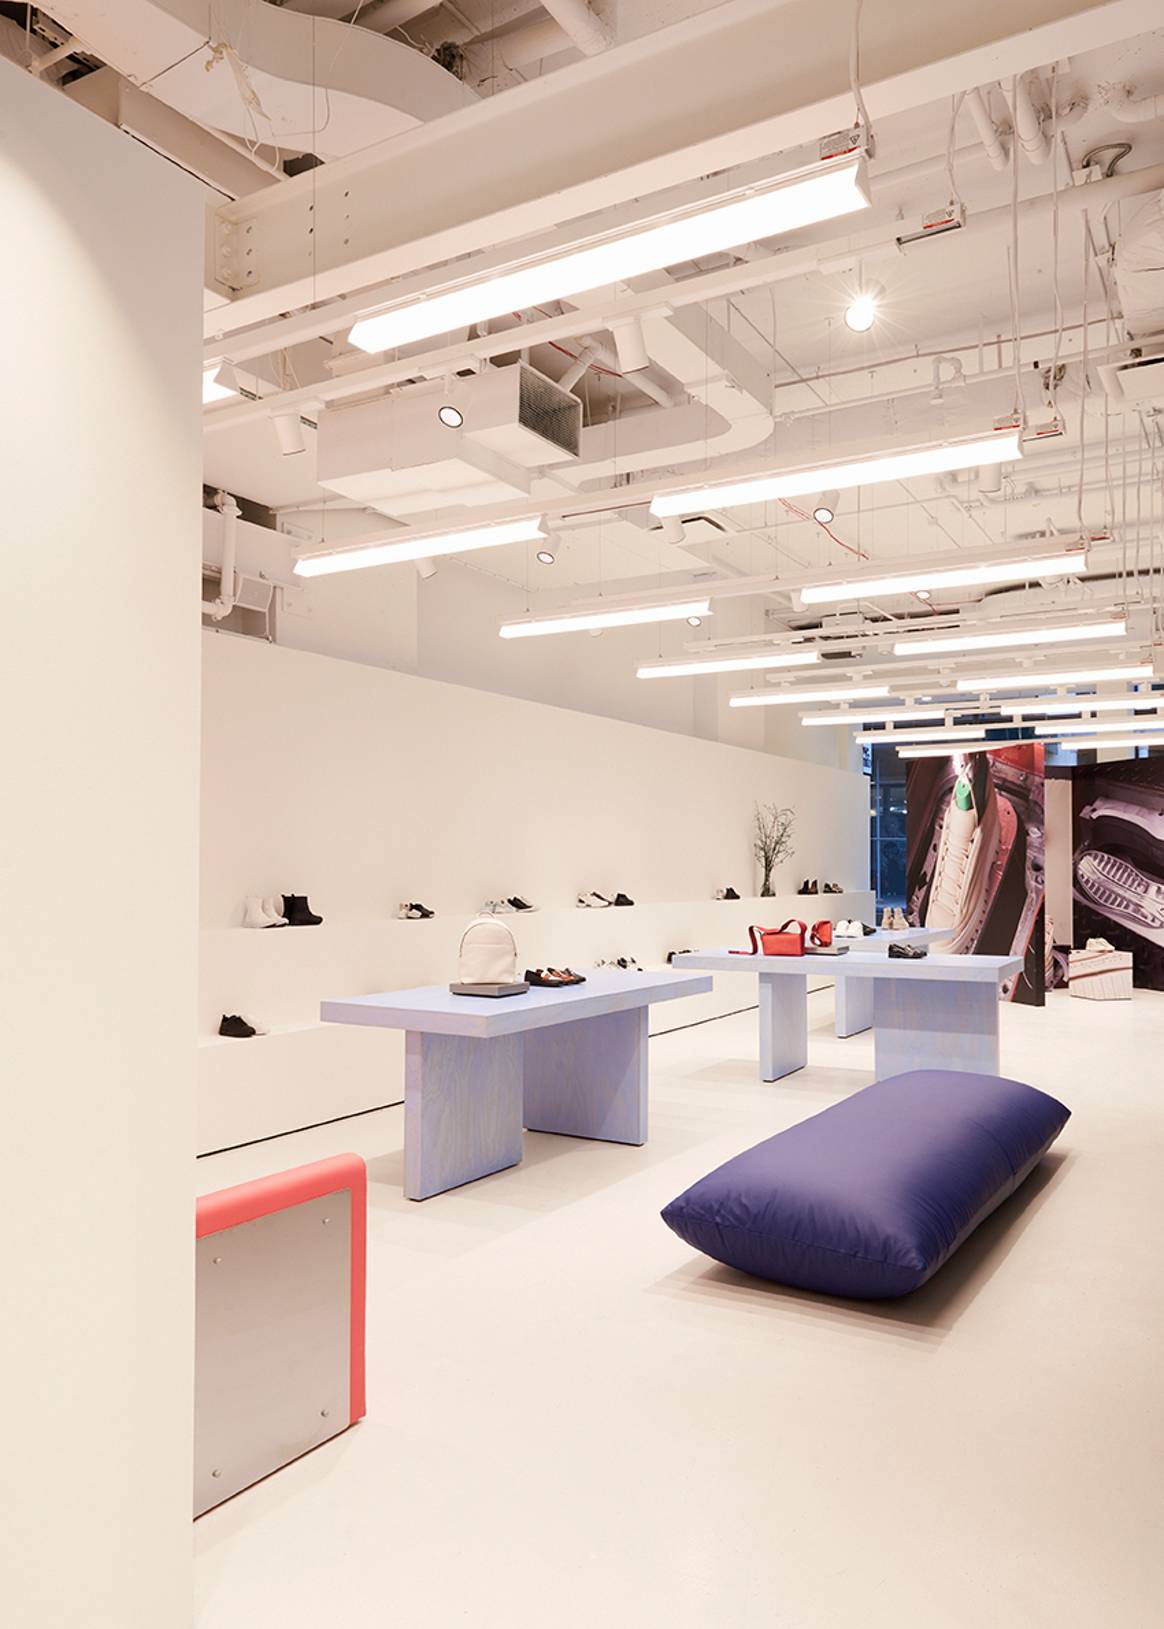 Ecco opens its first New York flagship store